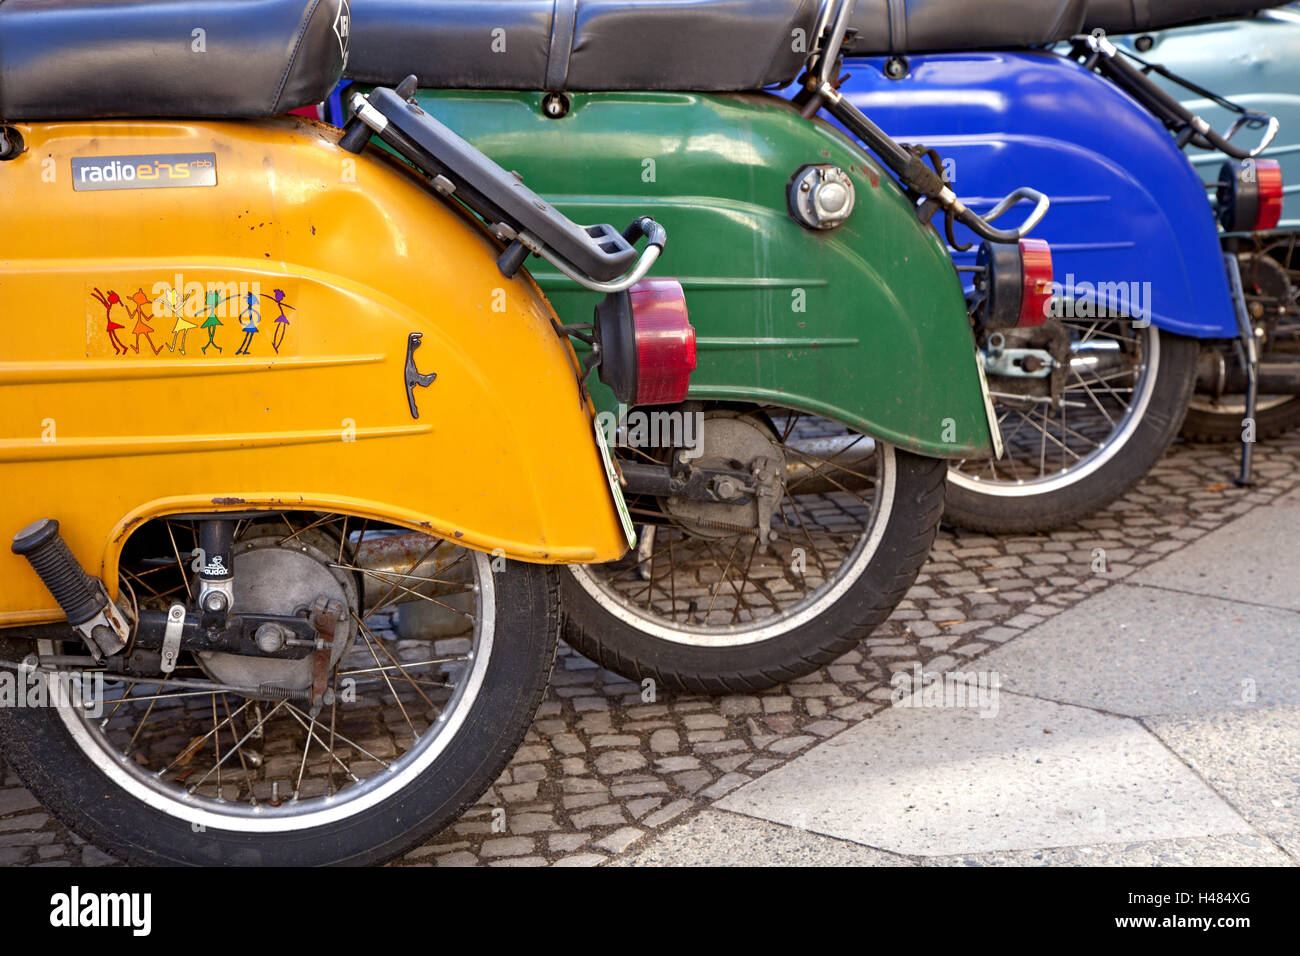 Motorbikes, park, detail, Ostalgie, Brightly, the GDR, detail, Germany, Europe, German, cult, motor scooter, nobody, nostalgia, Retro, scooter, 'deliberate dive', style, transport, tyre, rear tyre, Stock Photo